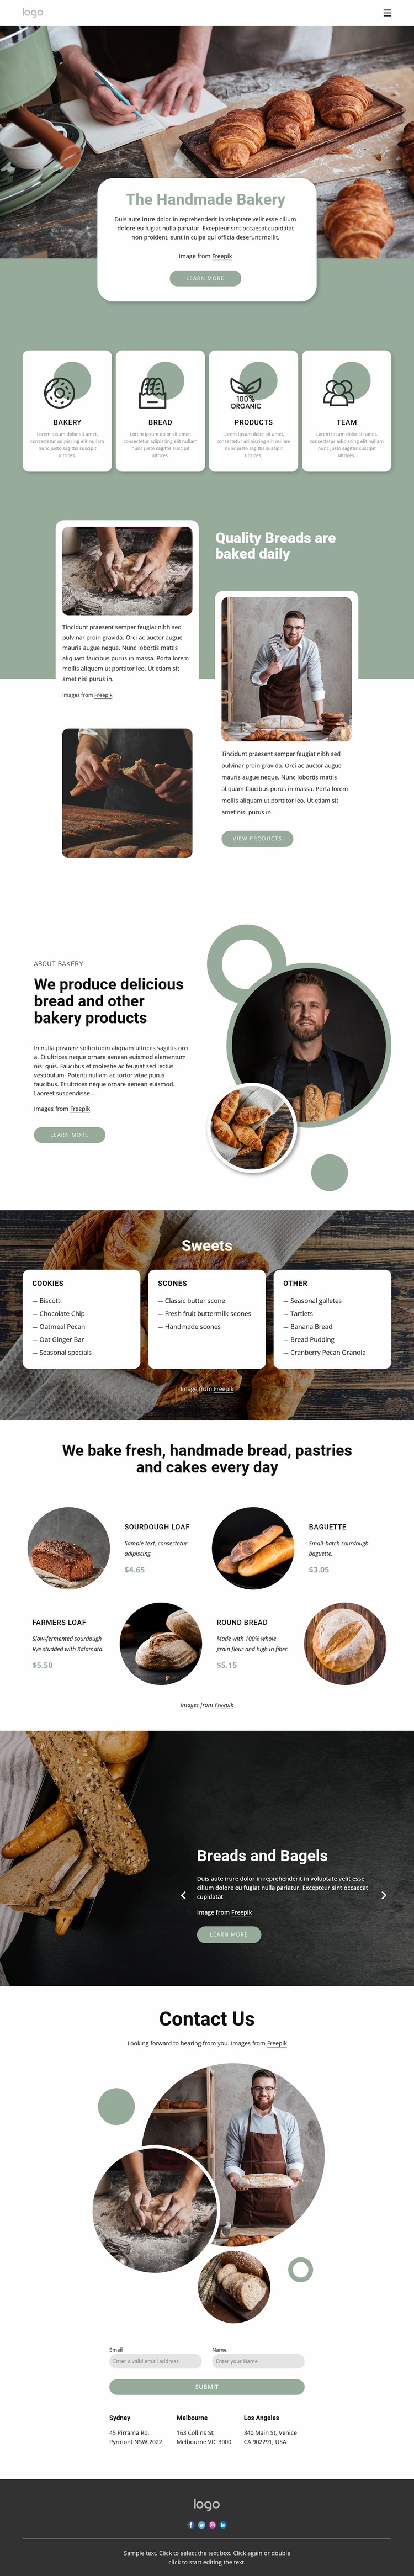 The handmade bakery Landing Page